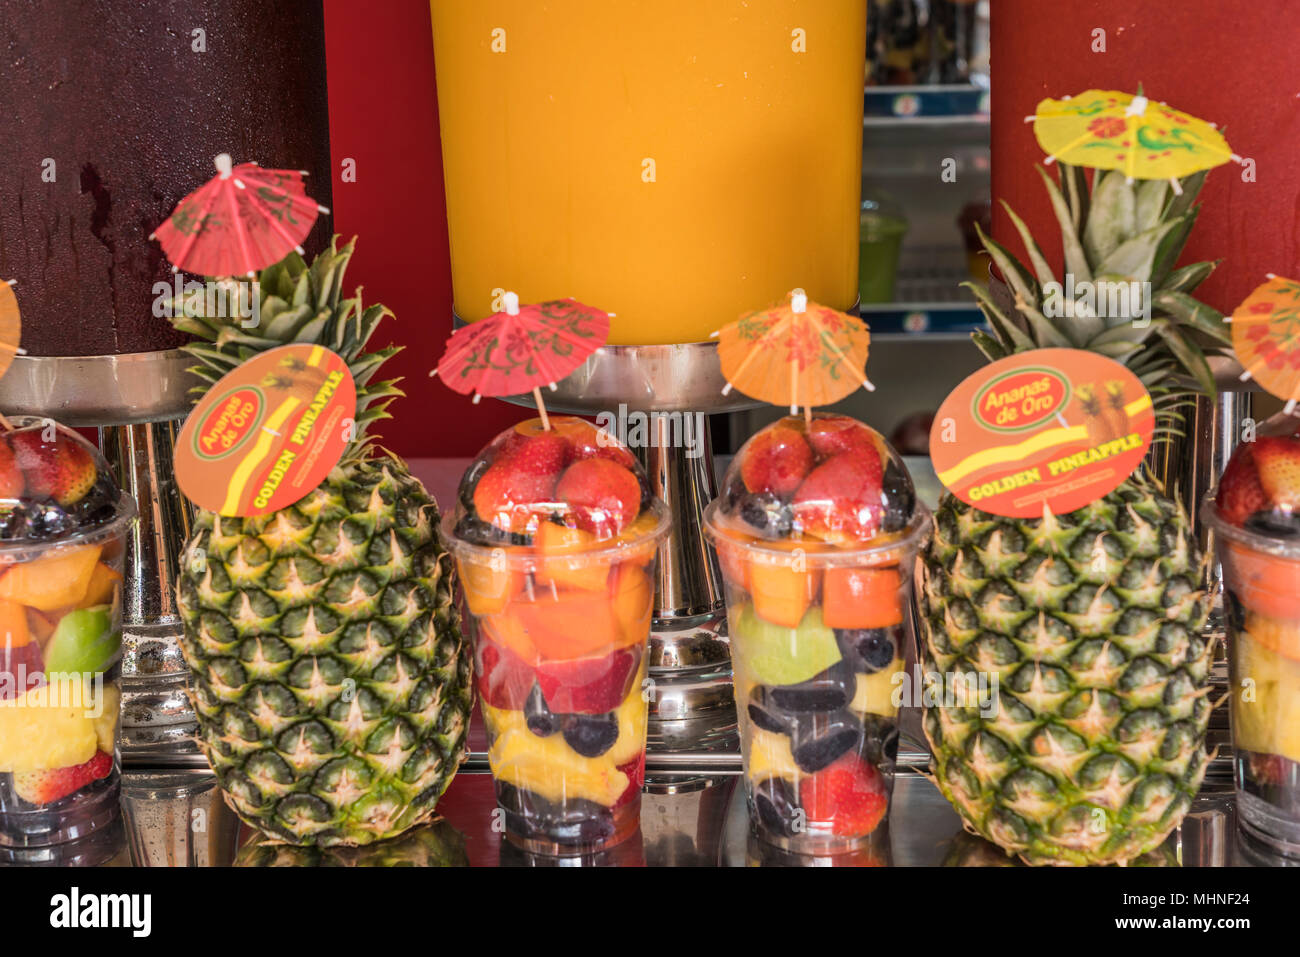 A fruit juice refreshment kiosk at the Miracle Gardens in Dubai, UAE, Middle East. Stock Photo